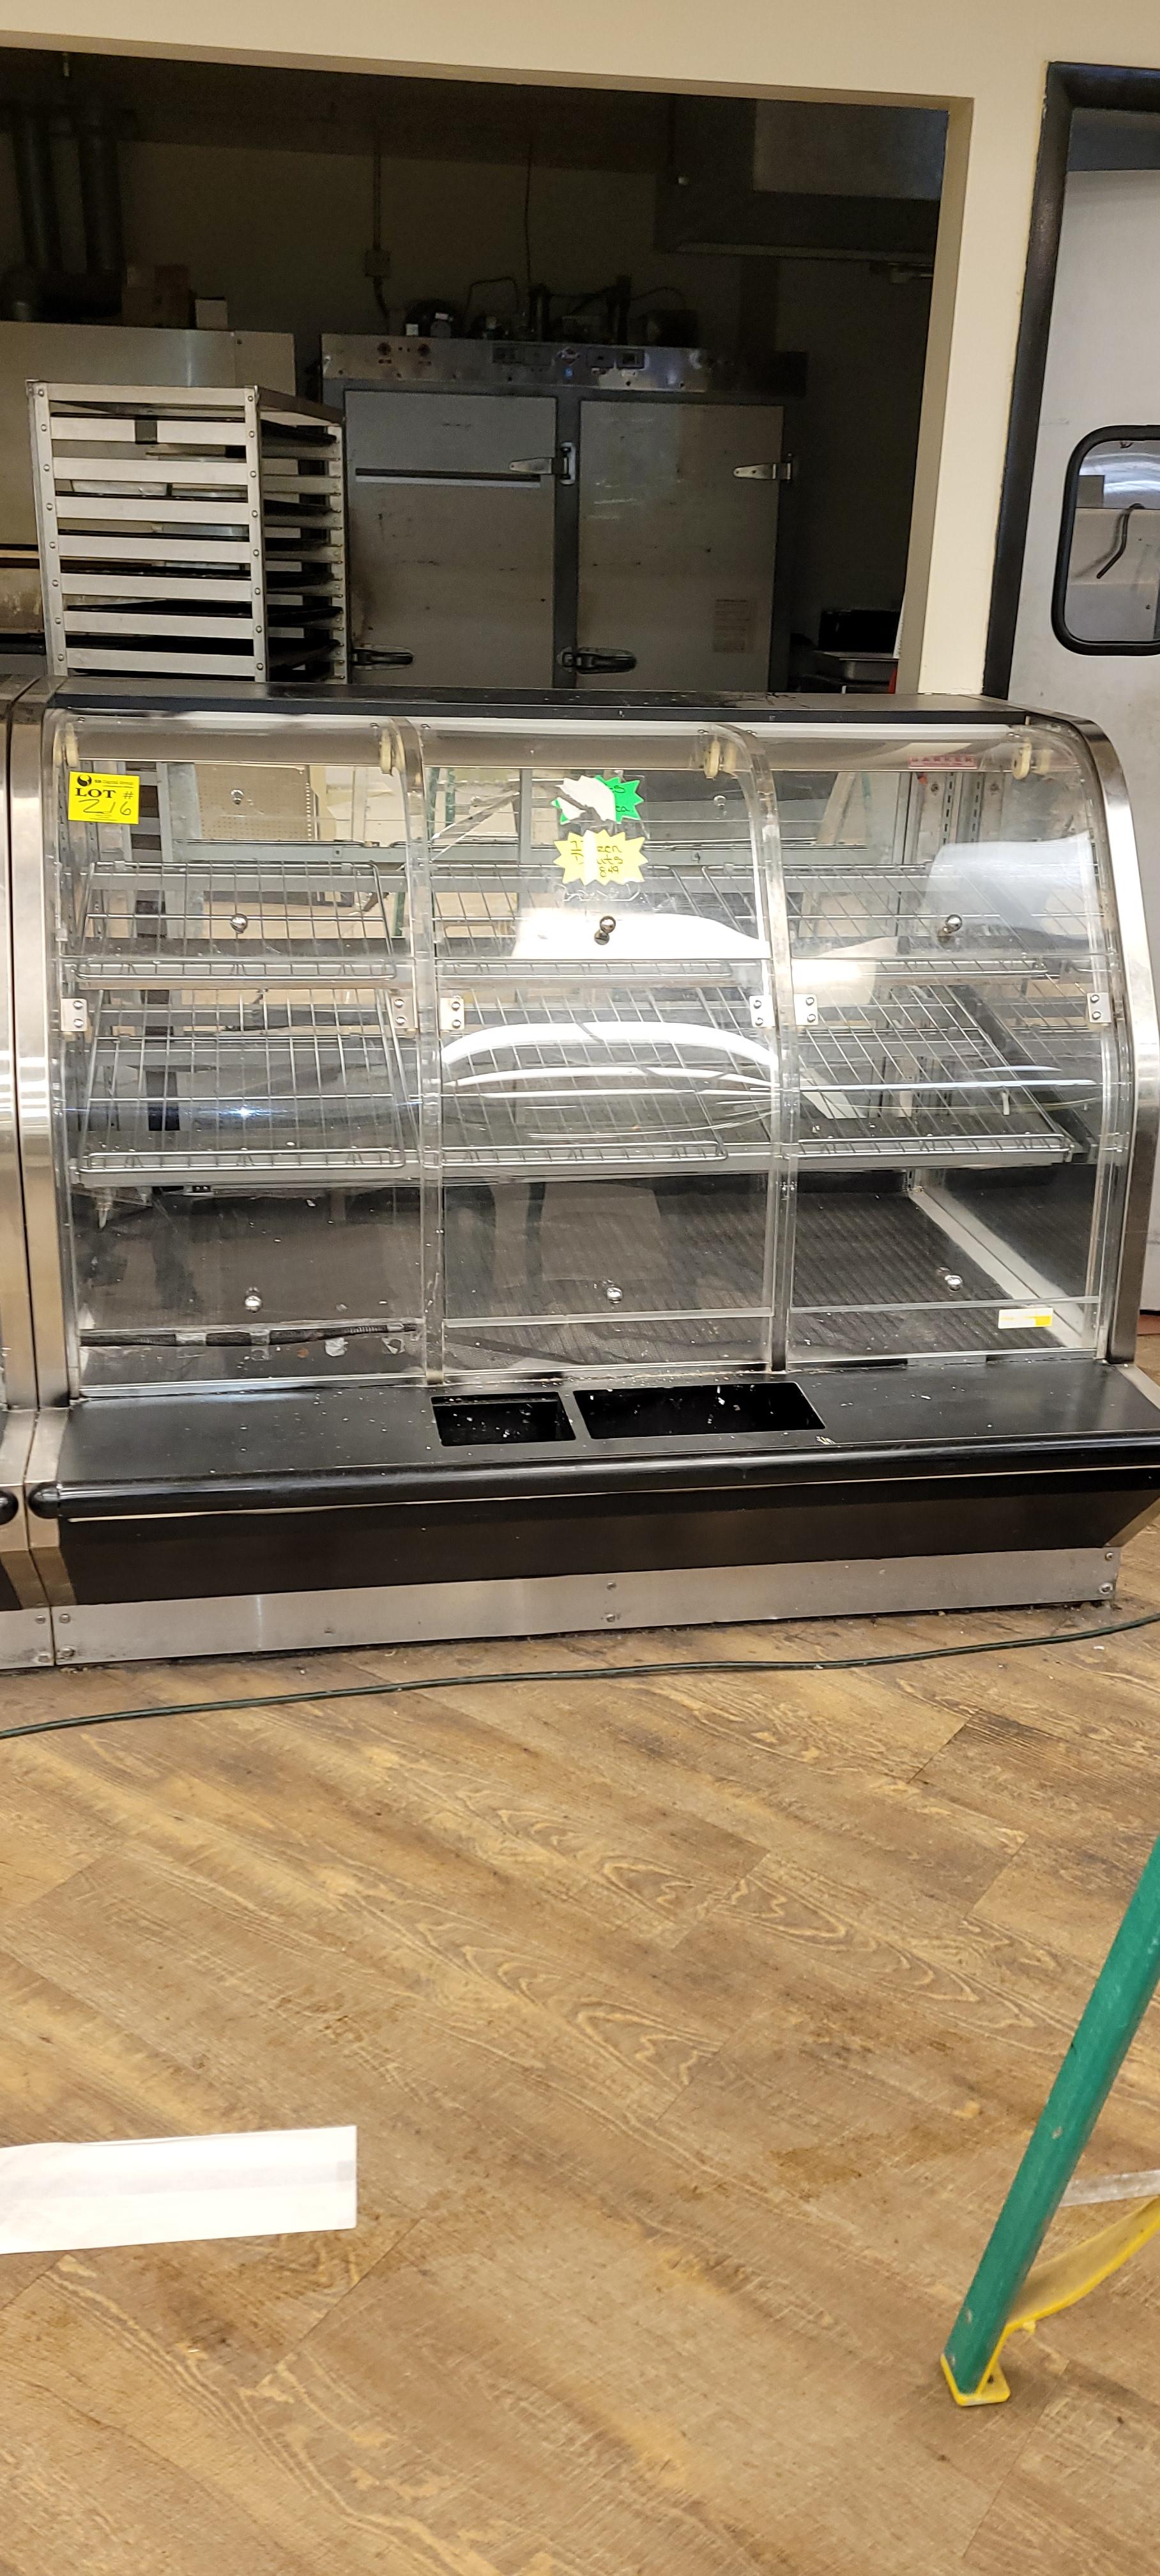 DONUT/BAGEL LIGHTED CASE 82 X 45 X 50 WITH SERVICE FROM REAR 6 PLASTIC DOOR